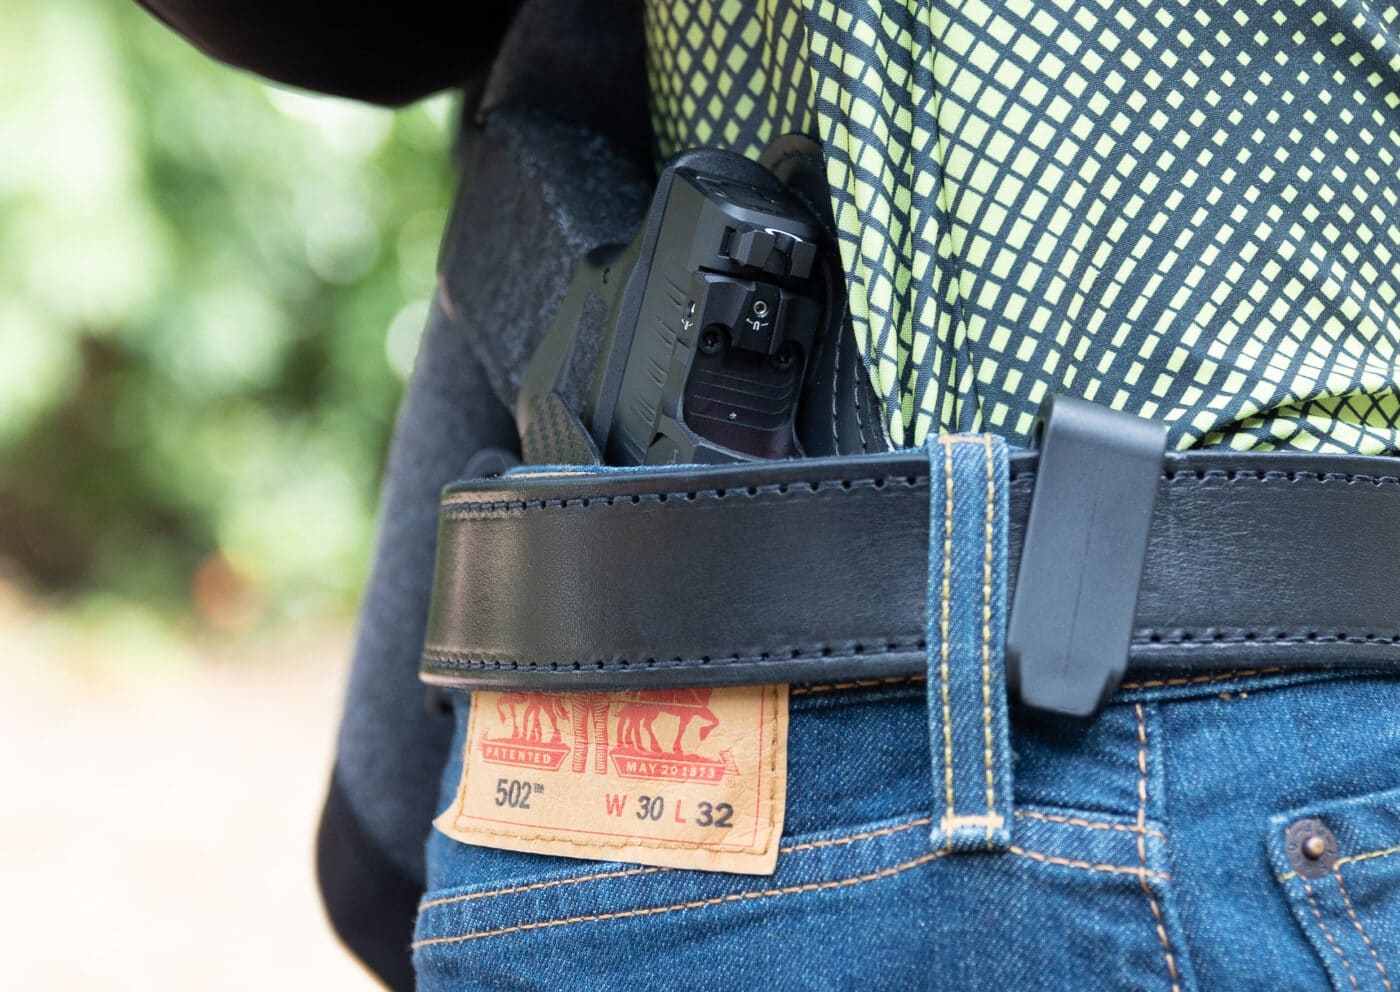 Black Arch Protos-M holster with Hellcat Pro pistol carried inside the waistband